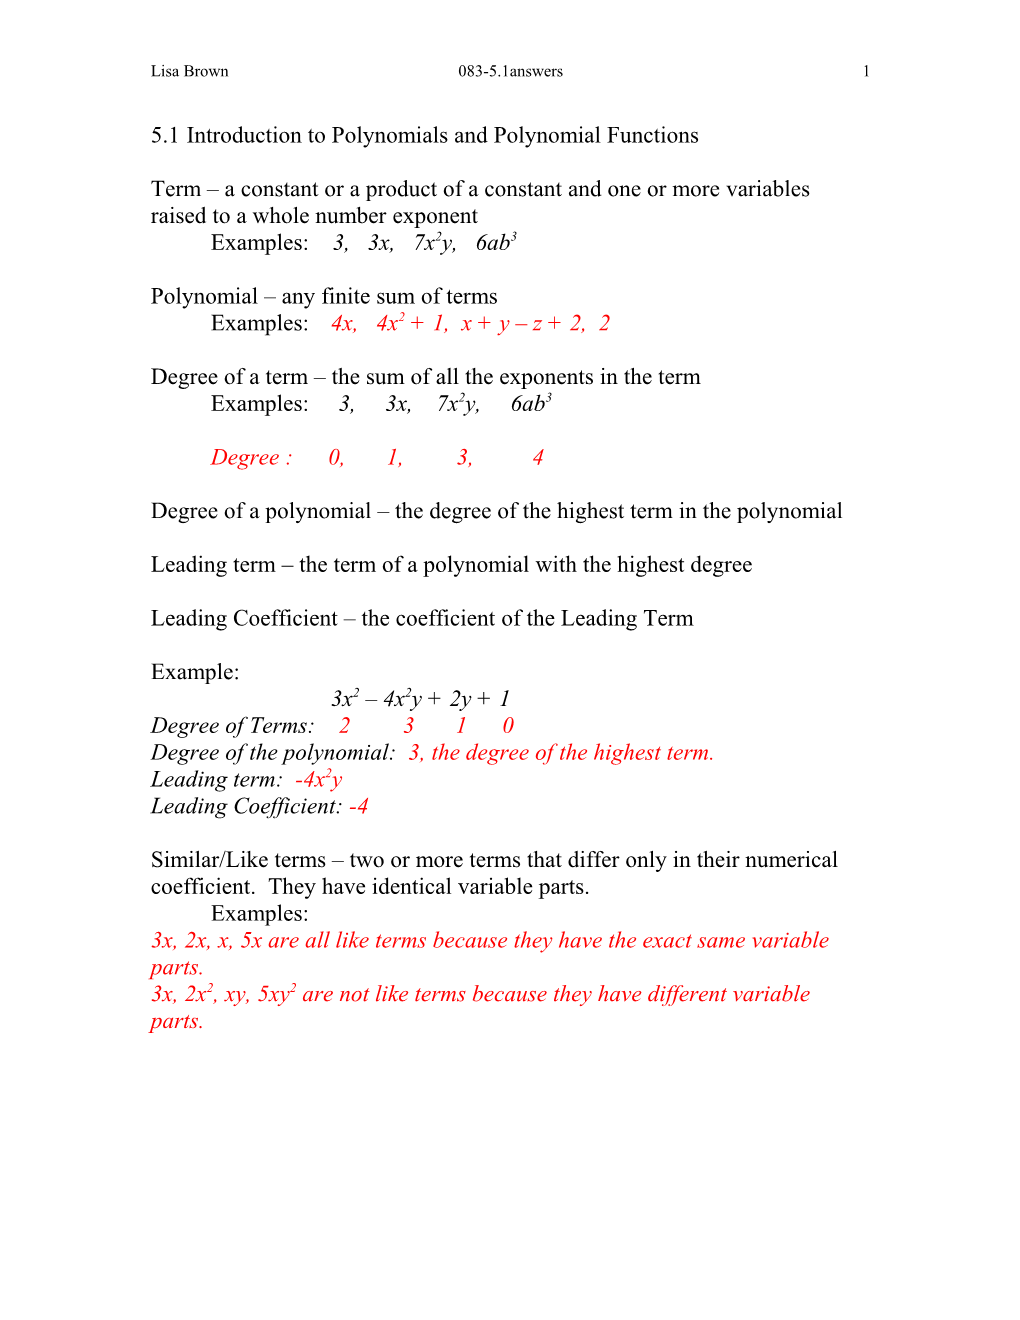 5.1 Introduction to Polynomials and Polynomial Functions